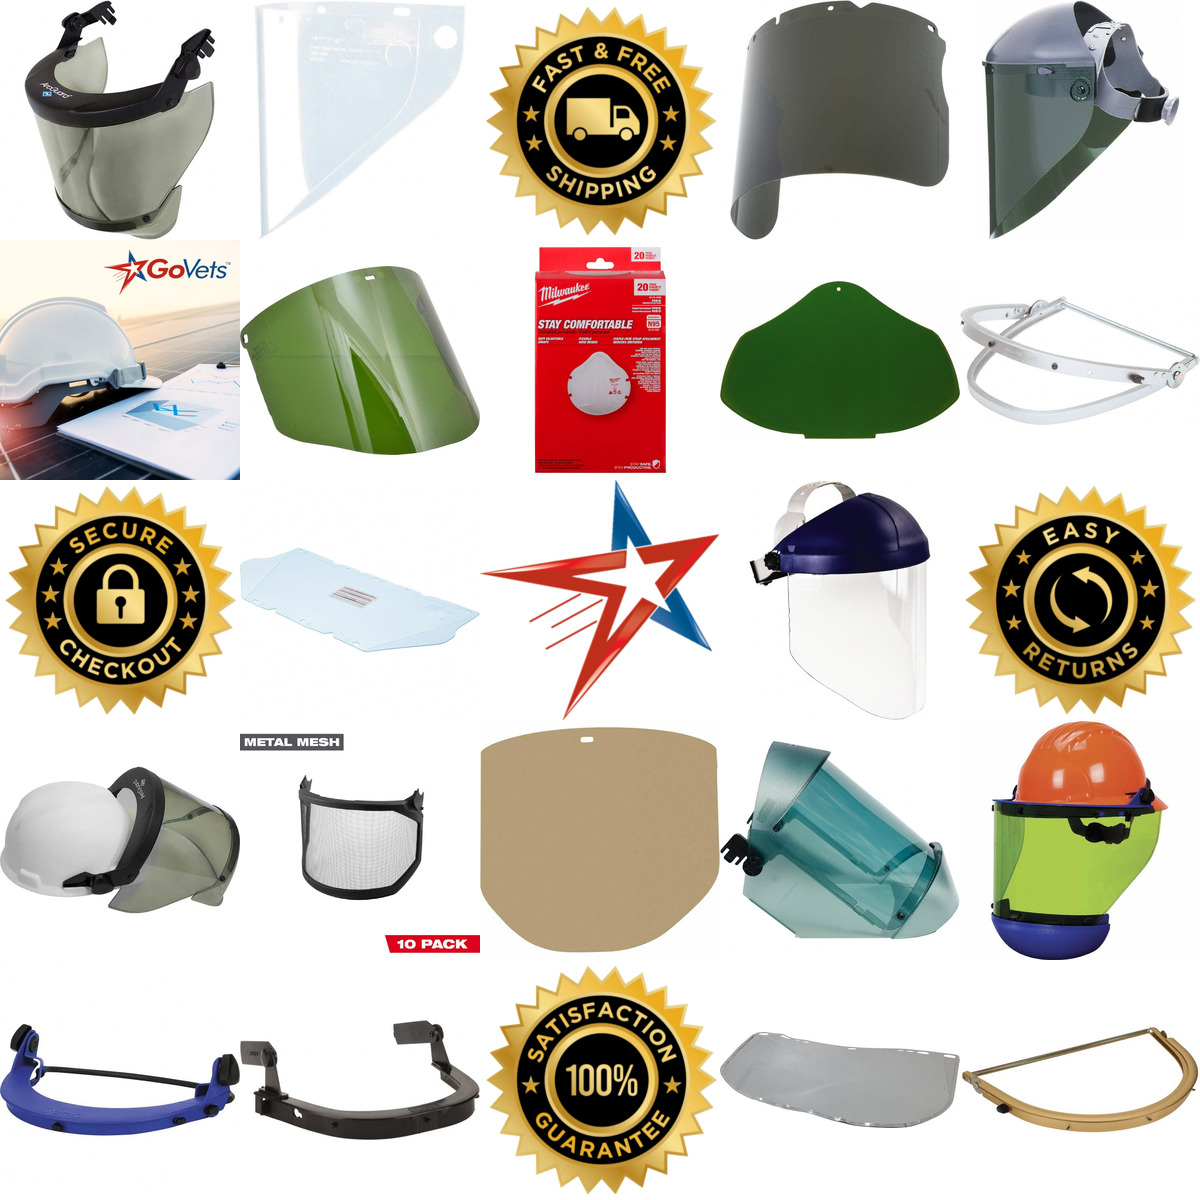 A selection of Face Shields and Headgear products on GoVets